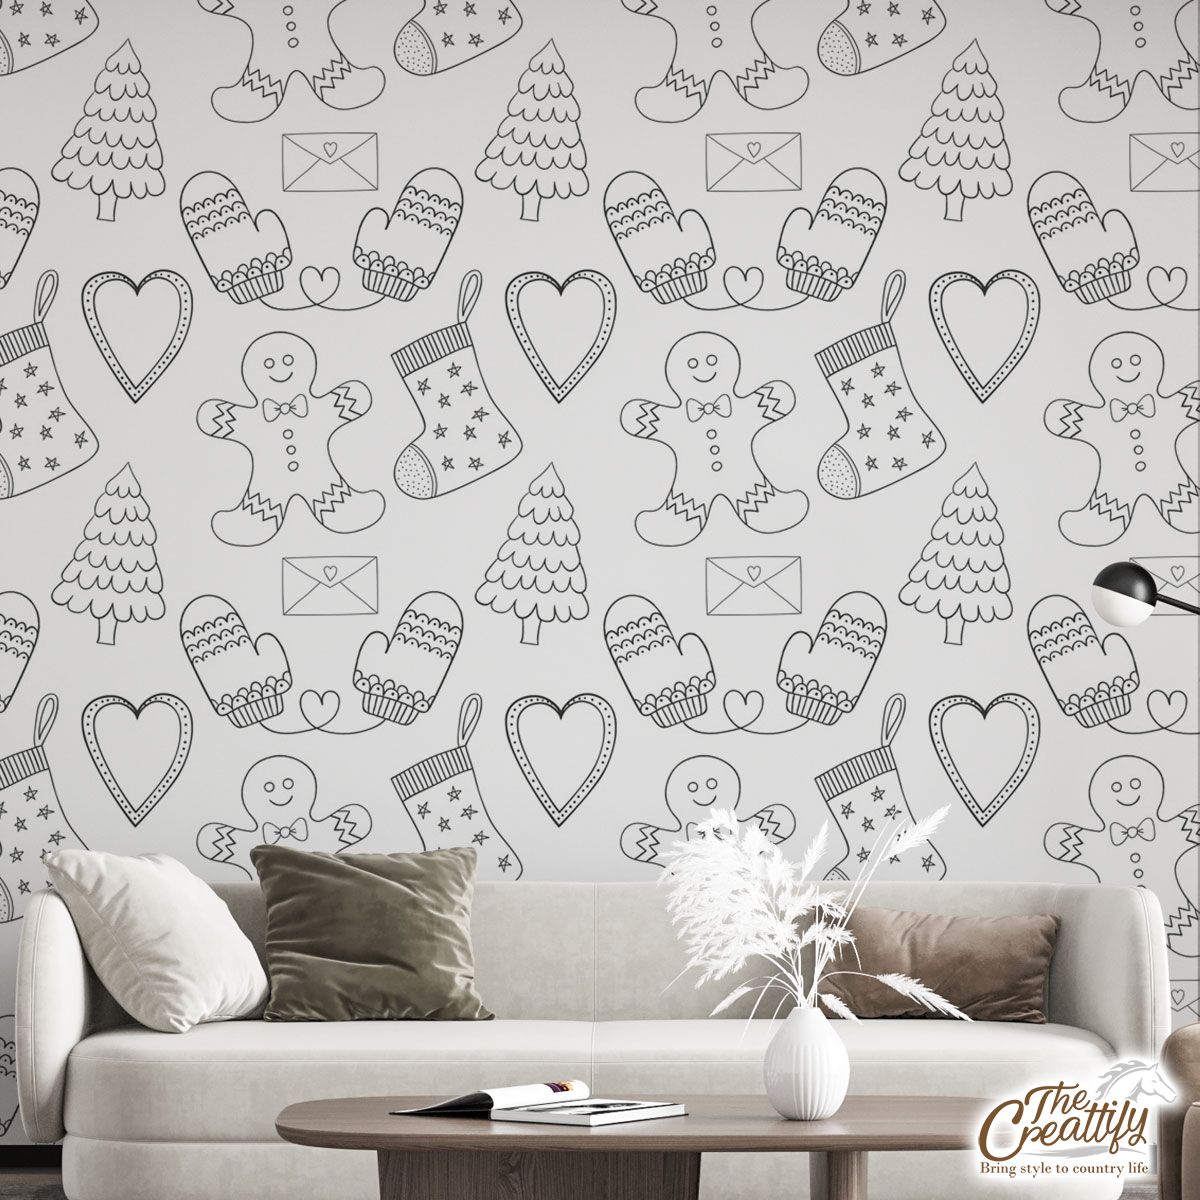 Black And White Christmas Tree, Gingerbread Man Wall Mural